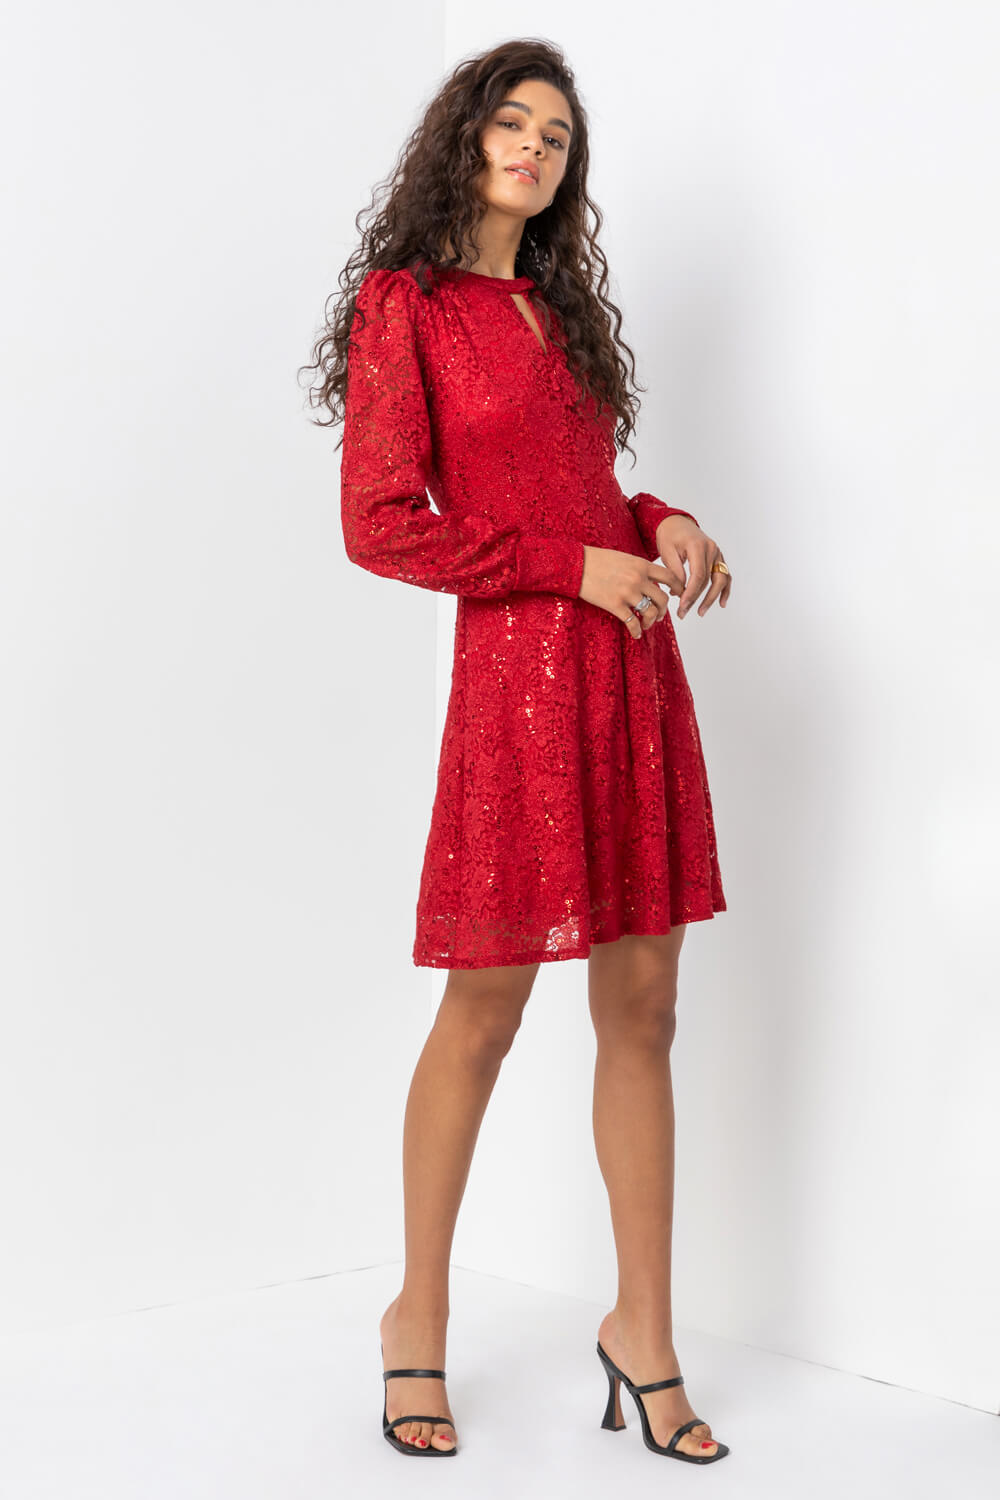 Red Lace Sparkle Swing Dress, Image 5 of 5